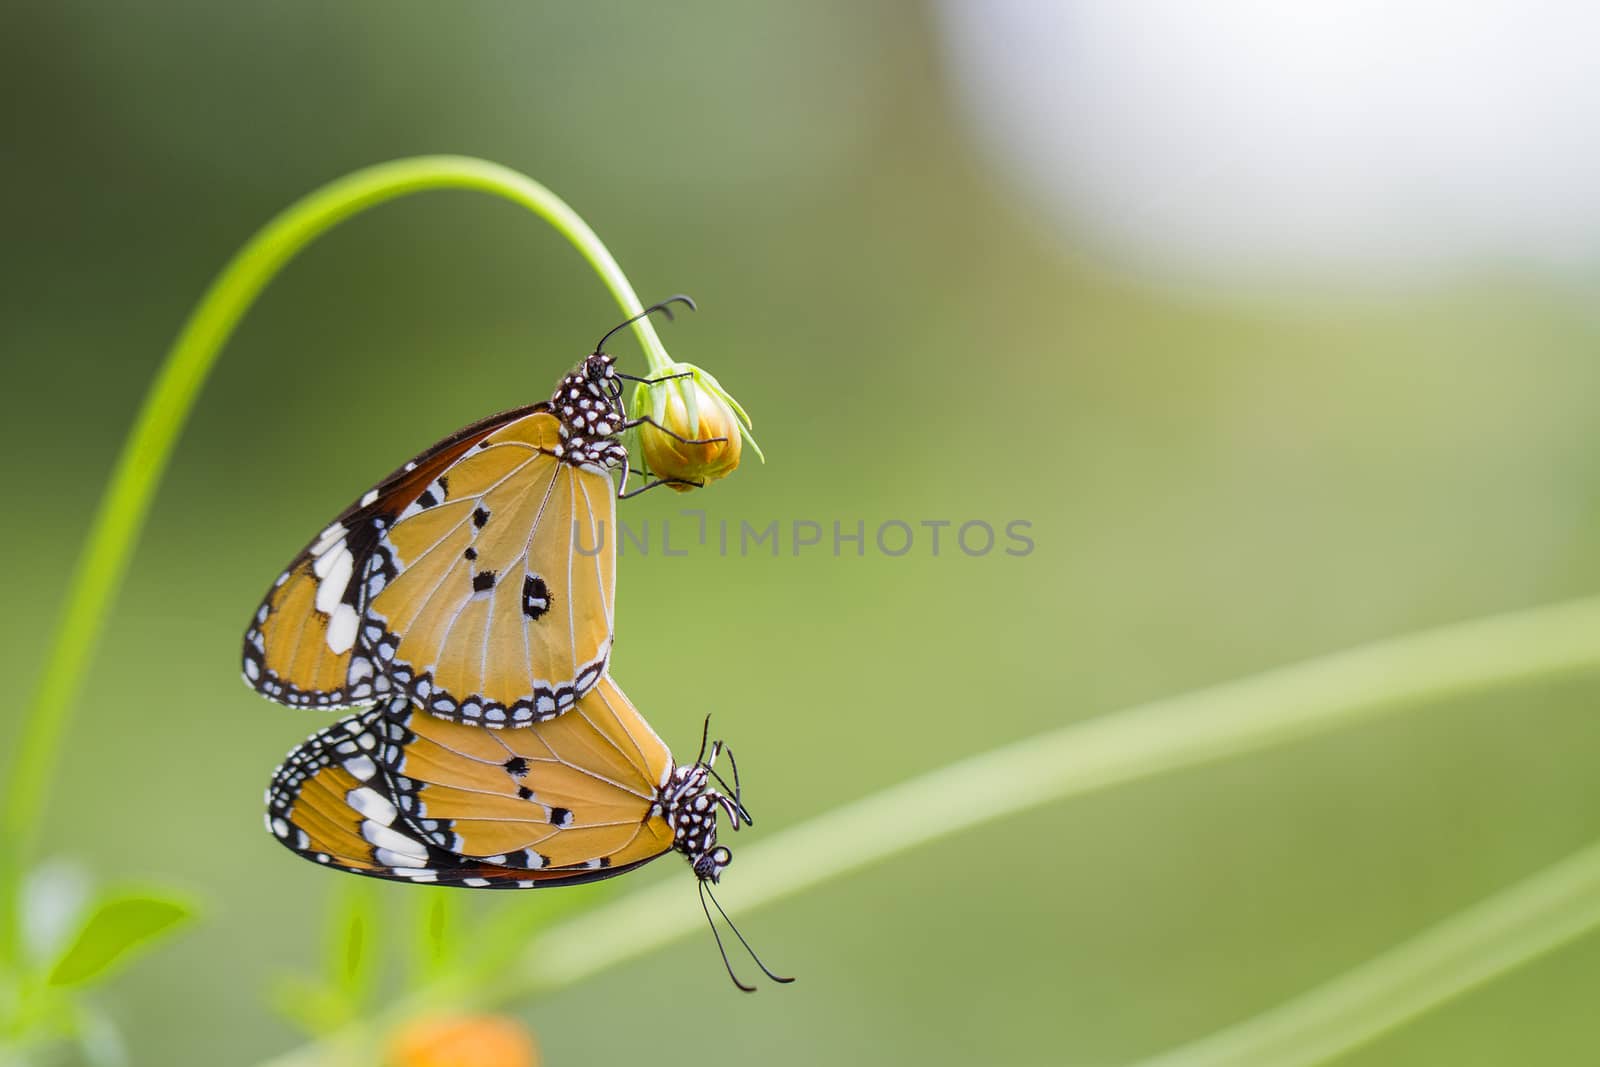 Butterfly mating on the flowers by TakerWalker